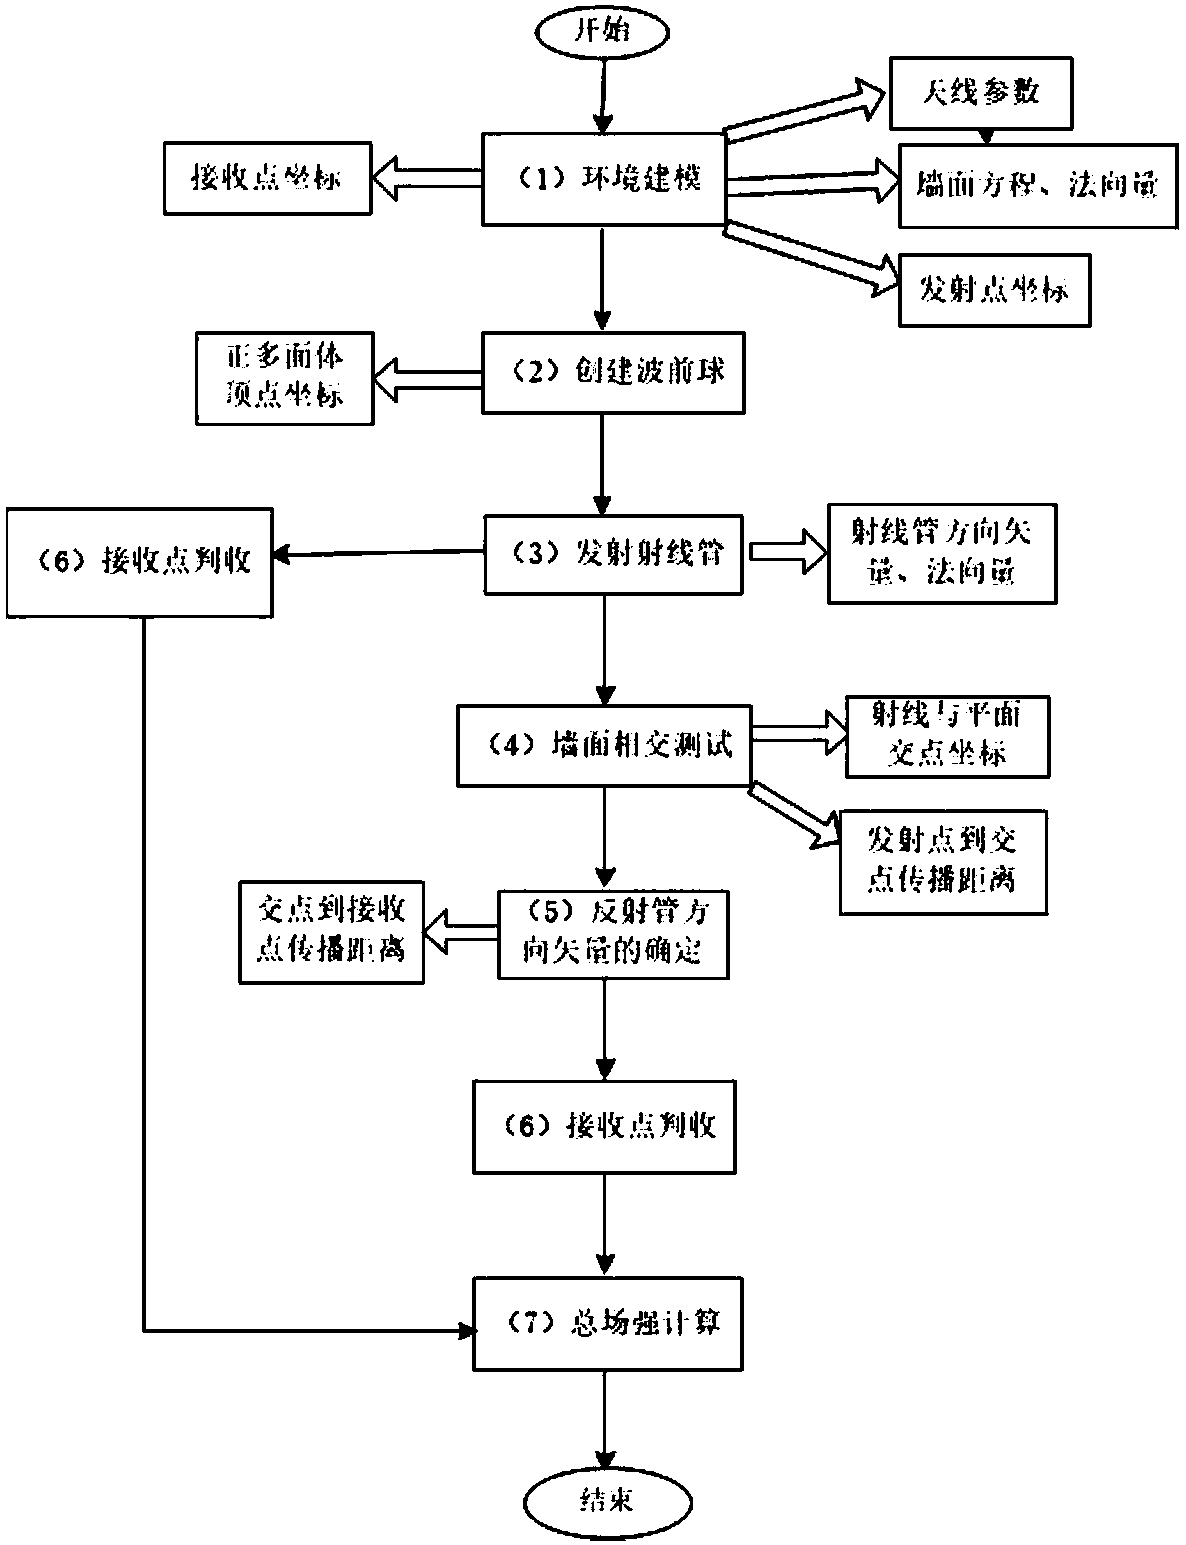 Electromagnetic wave propagation property analysis method and analysis system